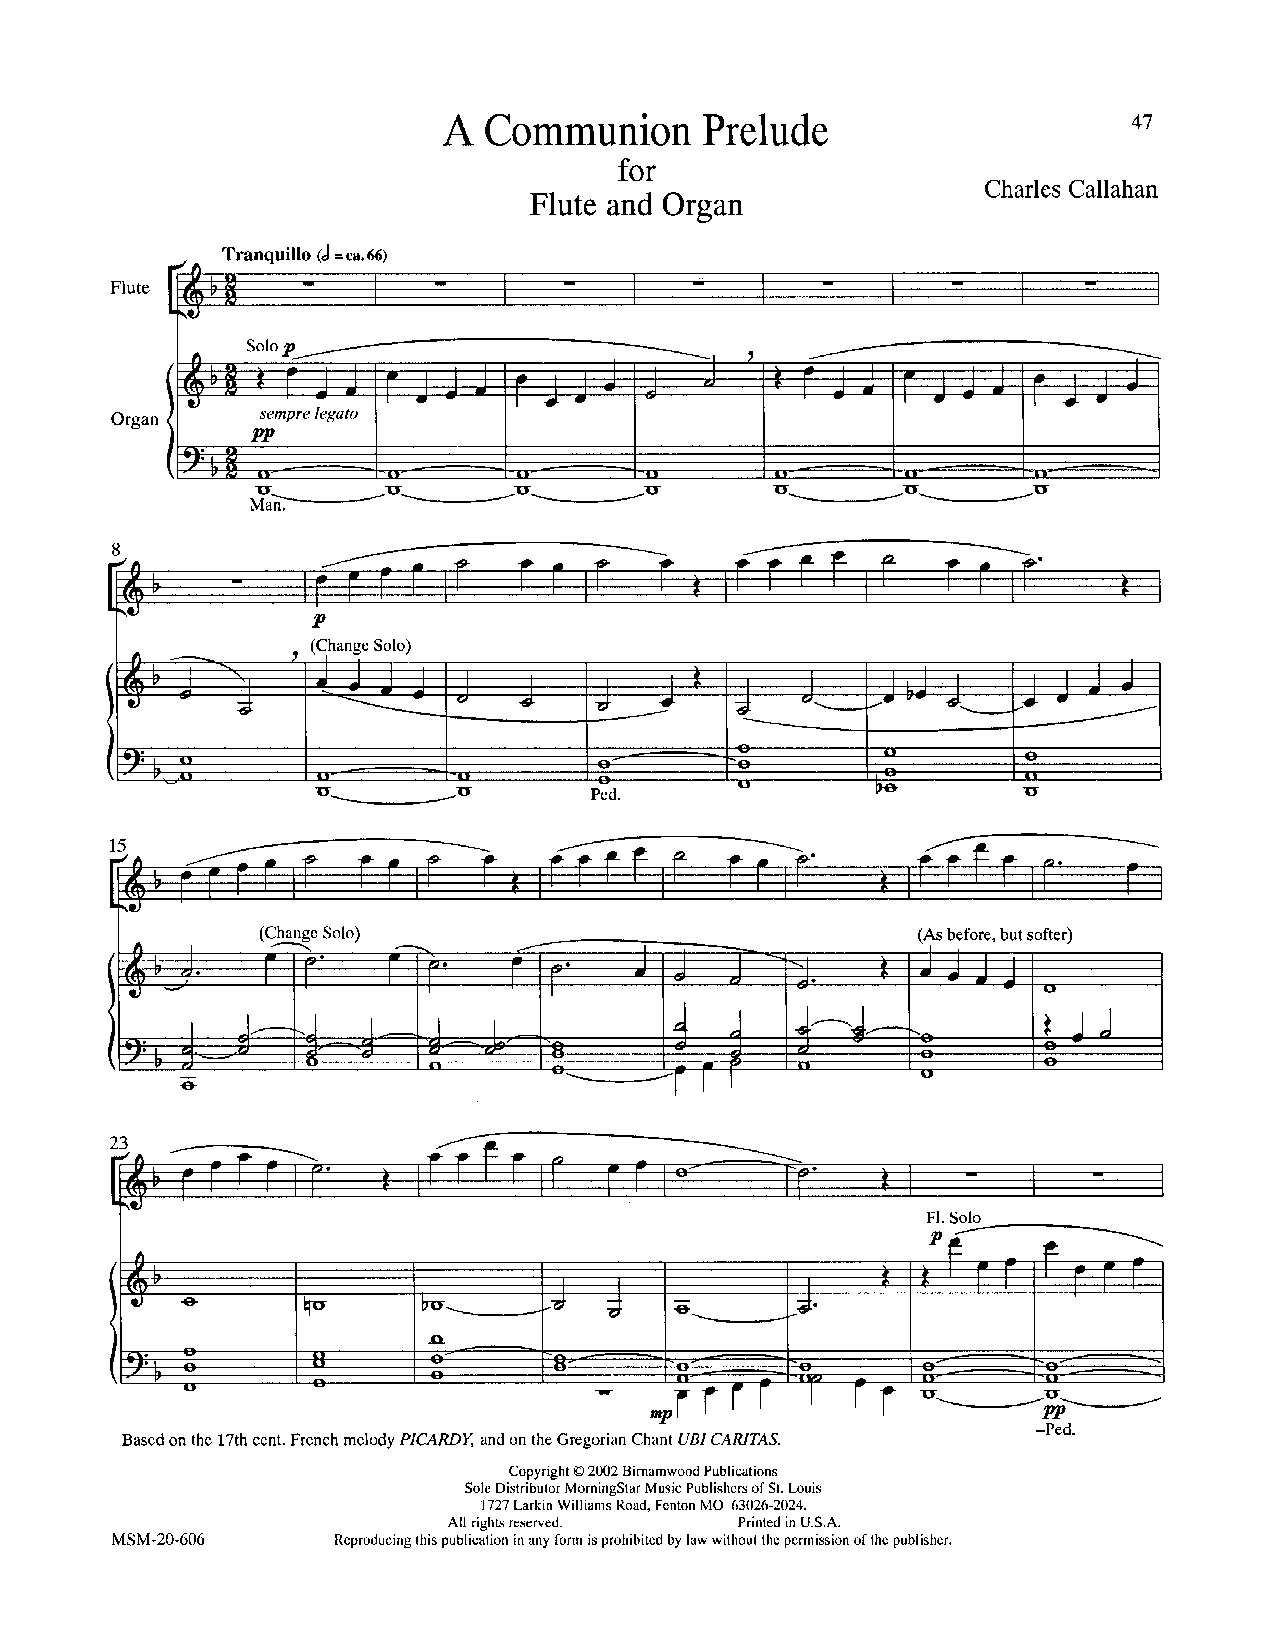 Preludes for Flute and Organ